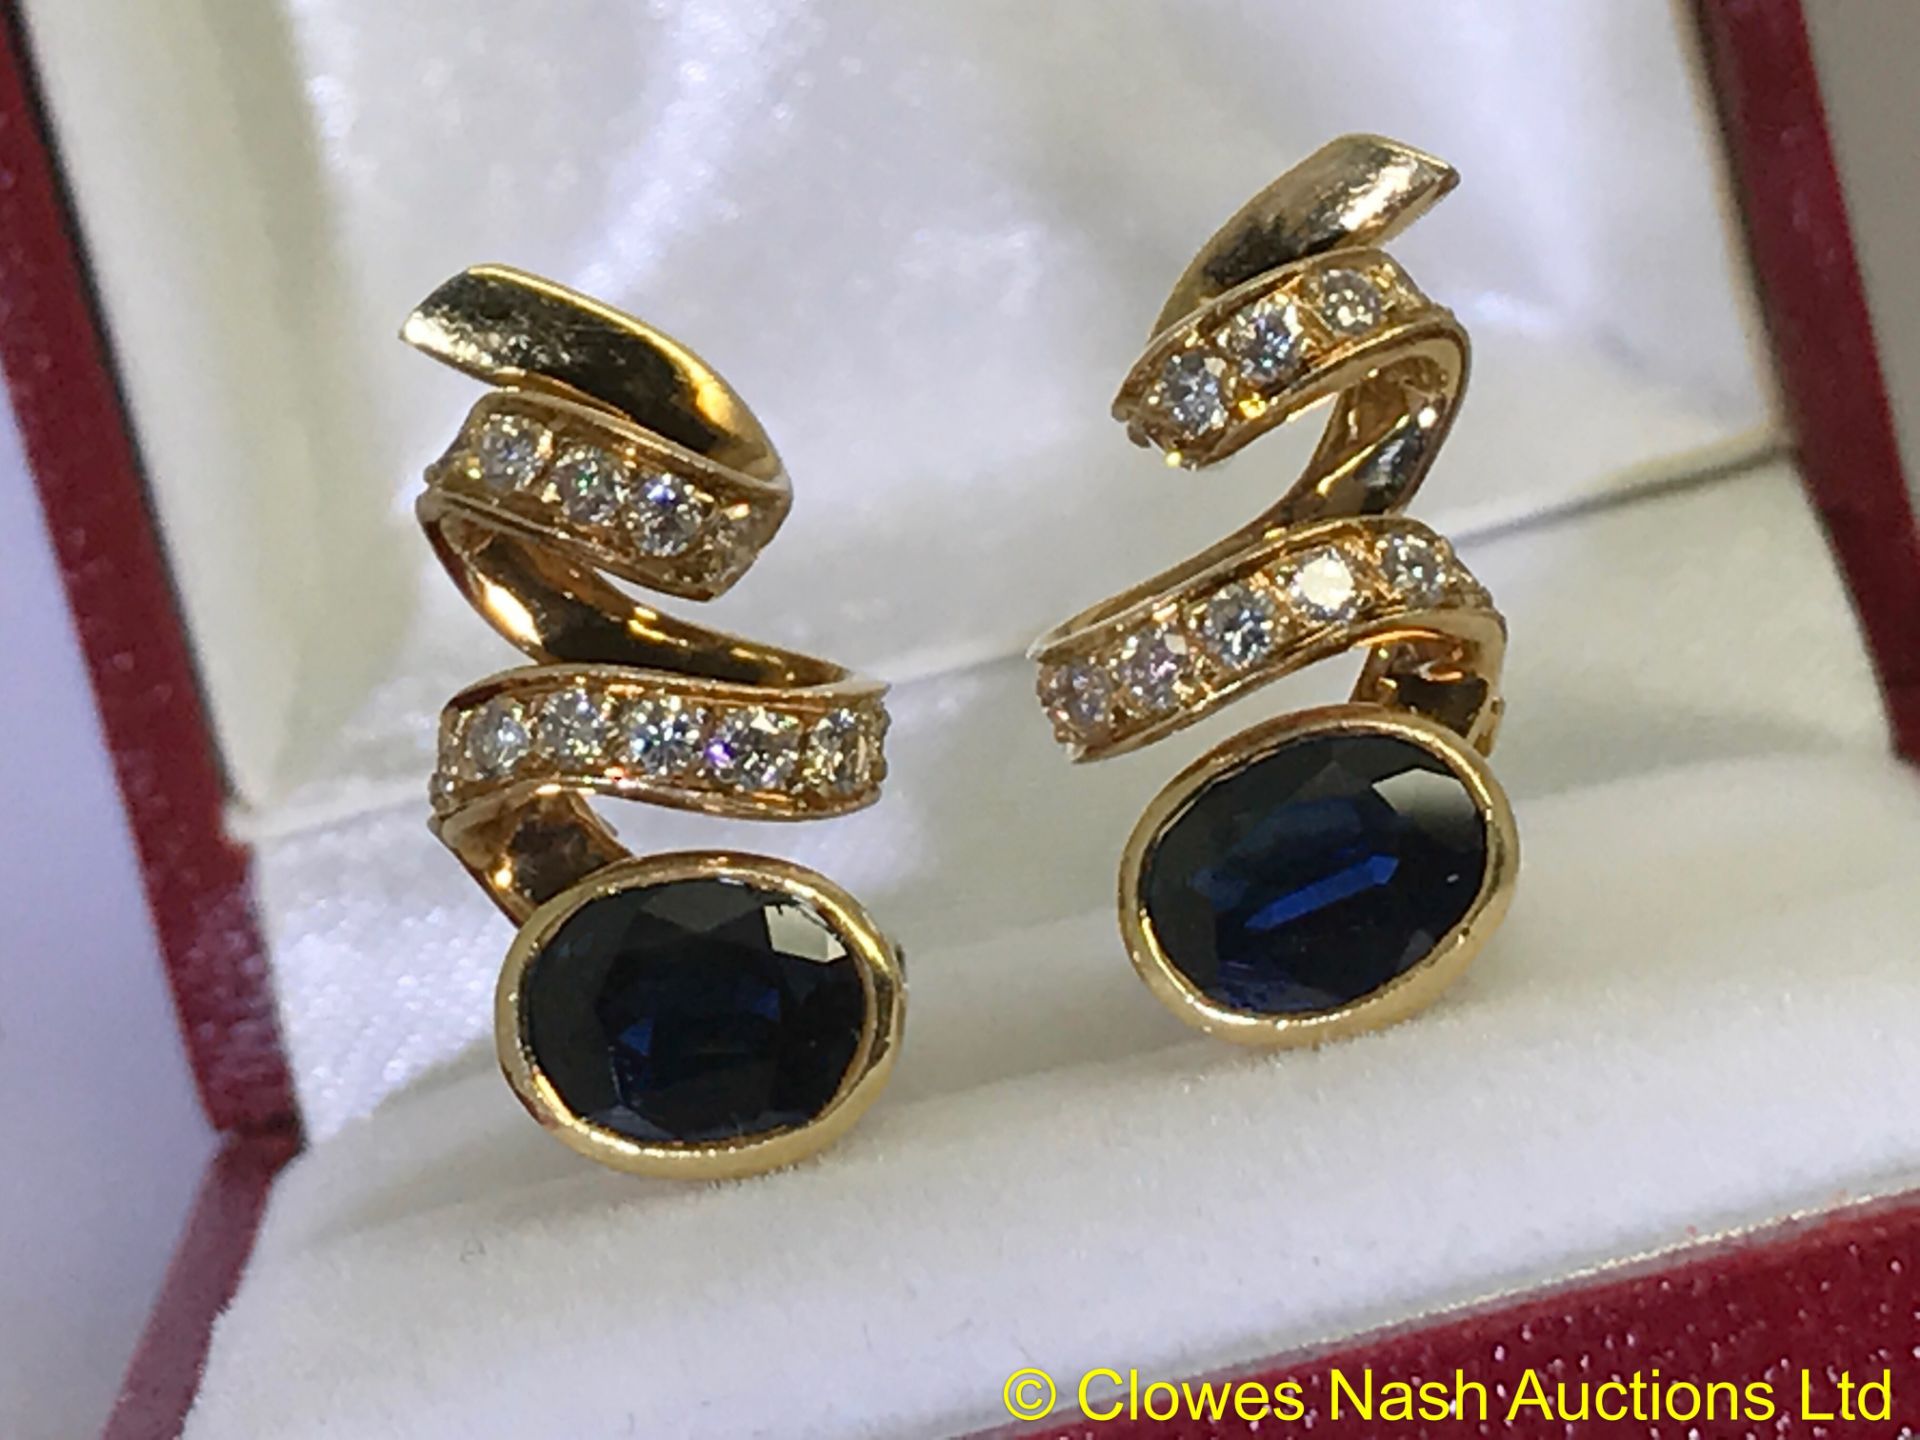 Quality Sapphire & Diamond Earrings set in yellow metal tested as 18ct Gold